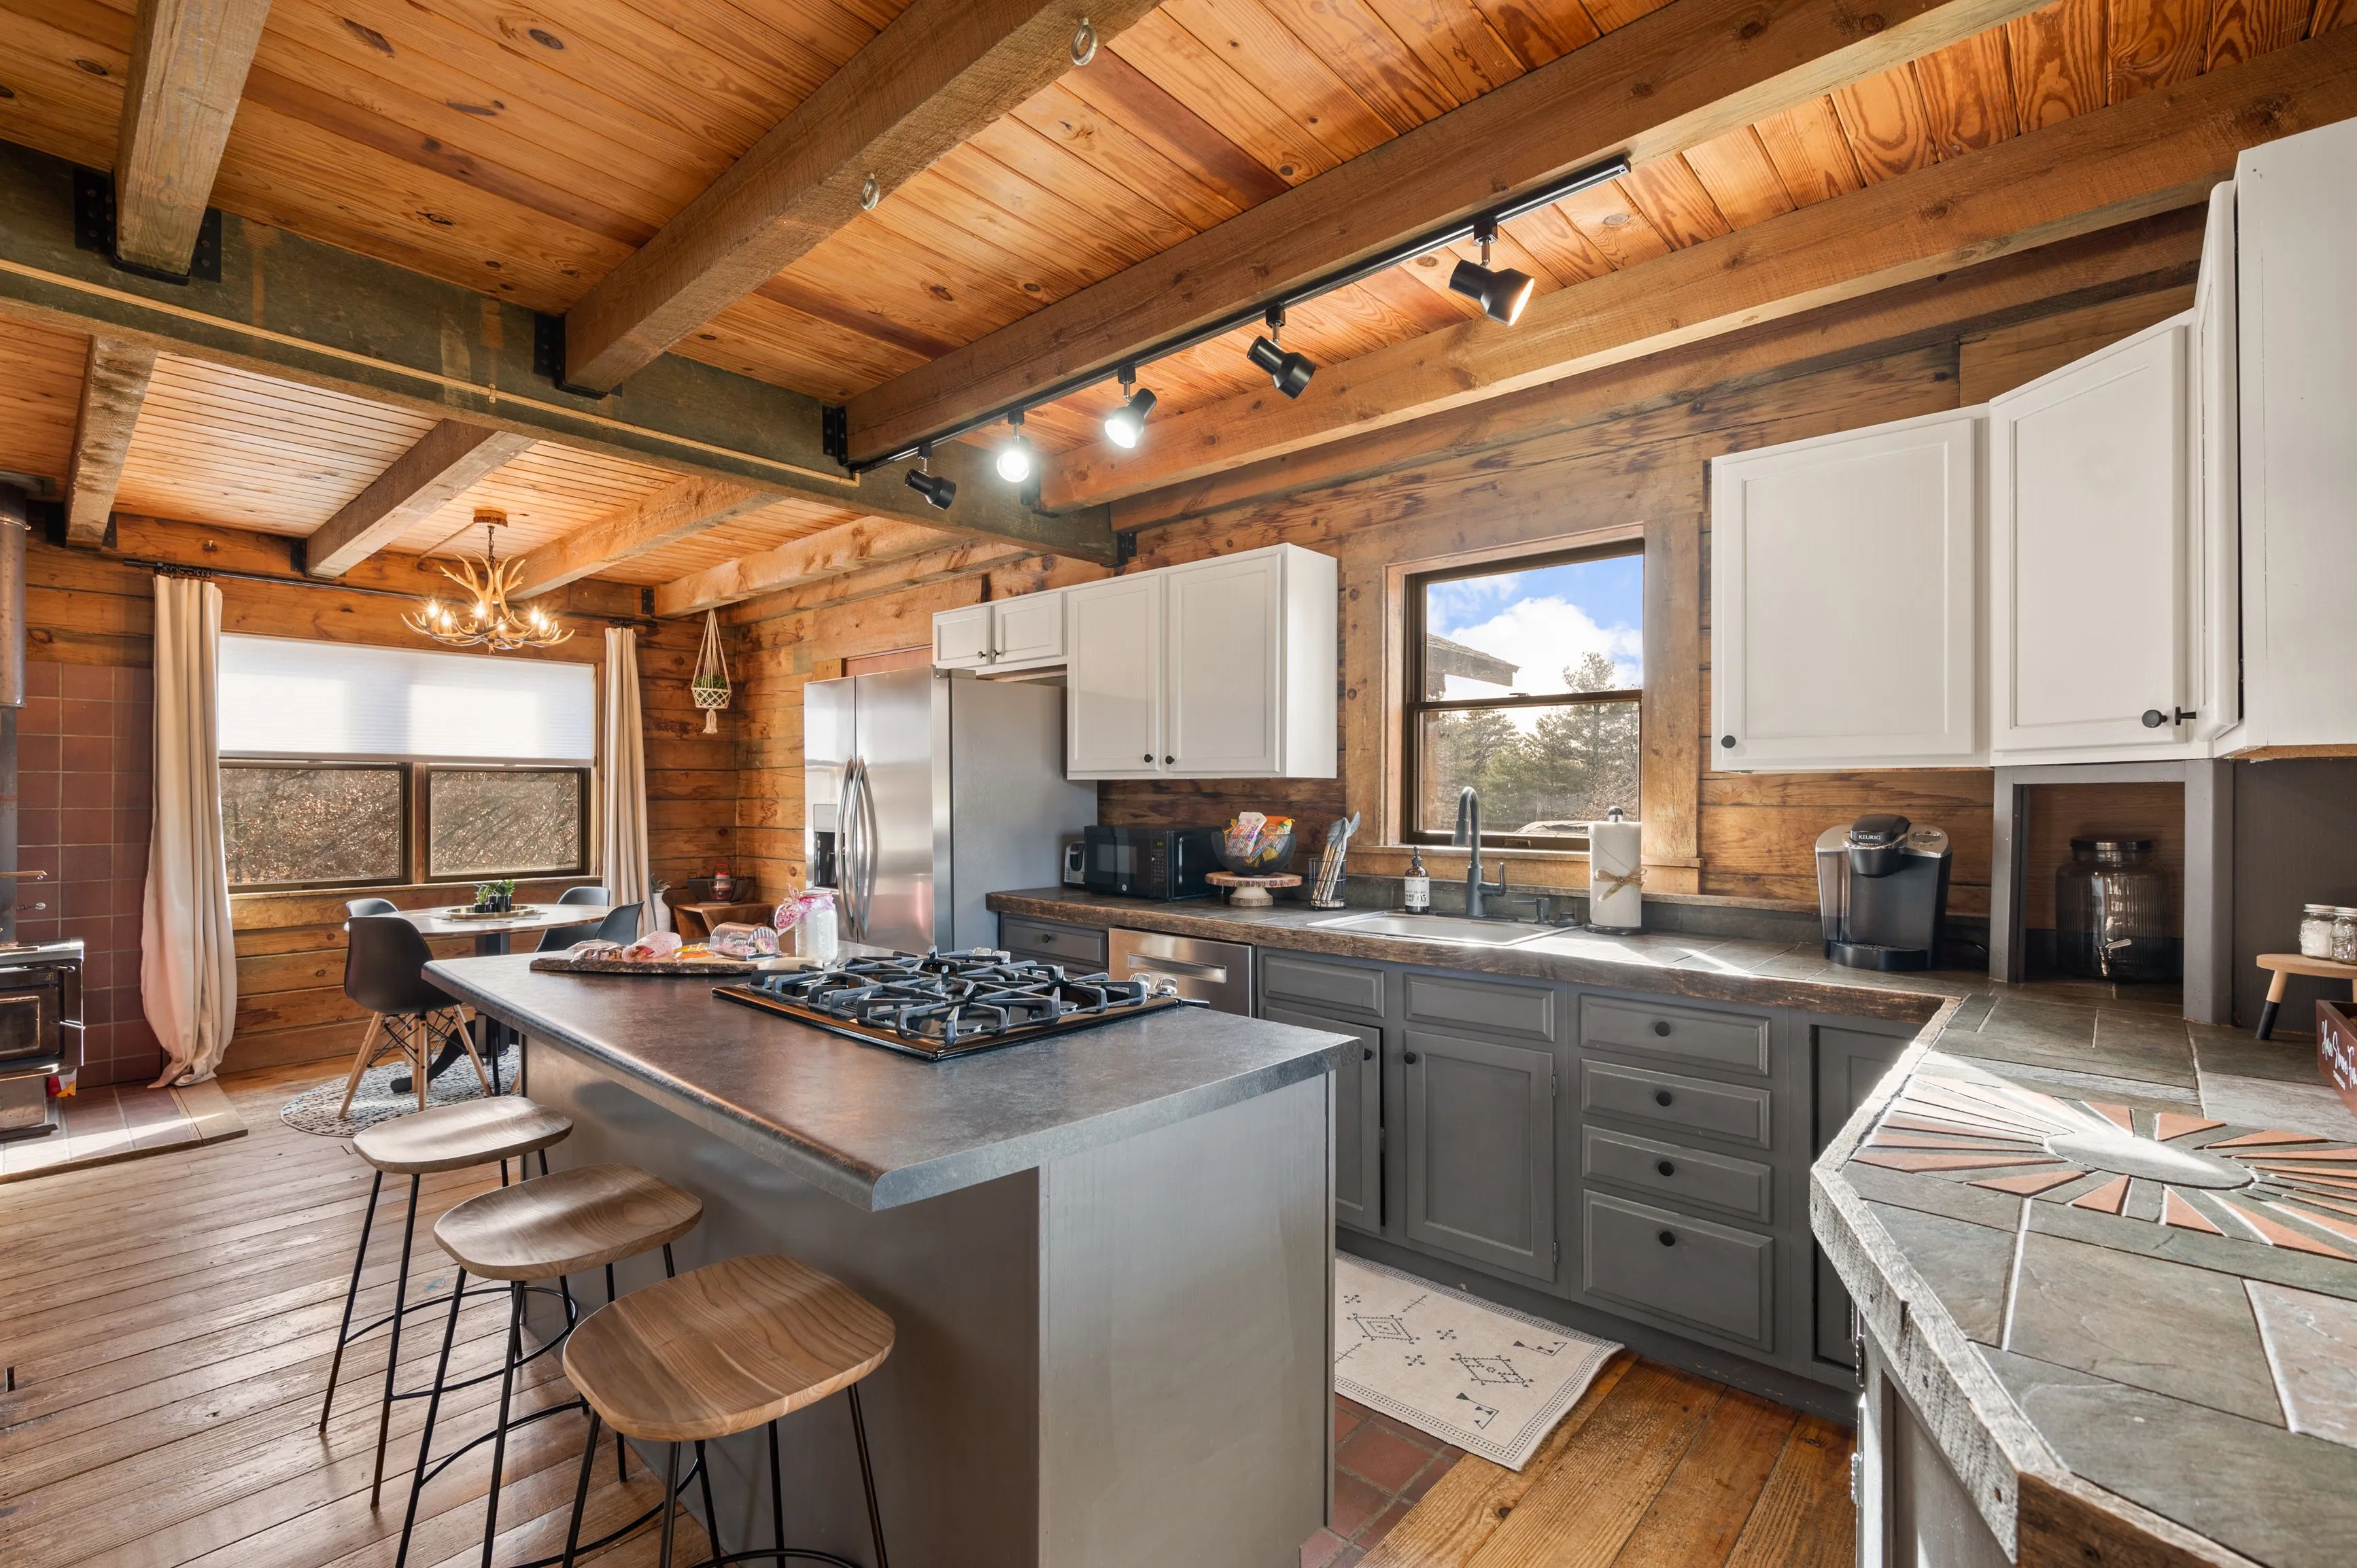 Rustic kitchen interior with wooden beams, hardwood floors, gray cabinetry, and a kitchen island with bar stools.